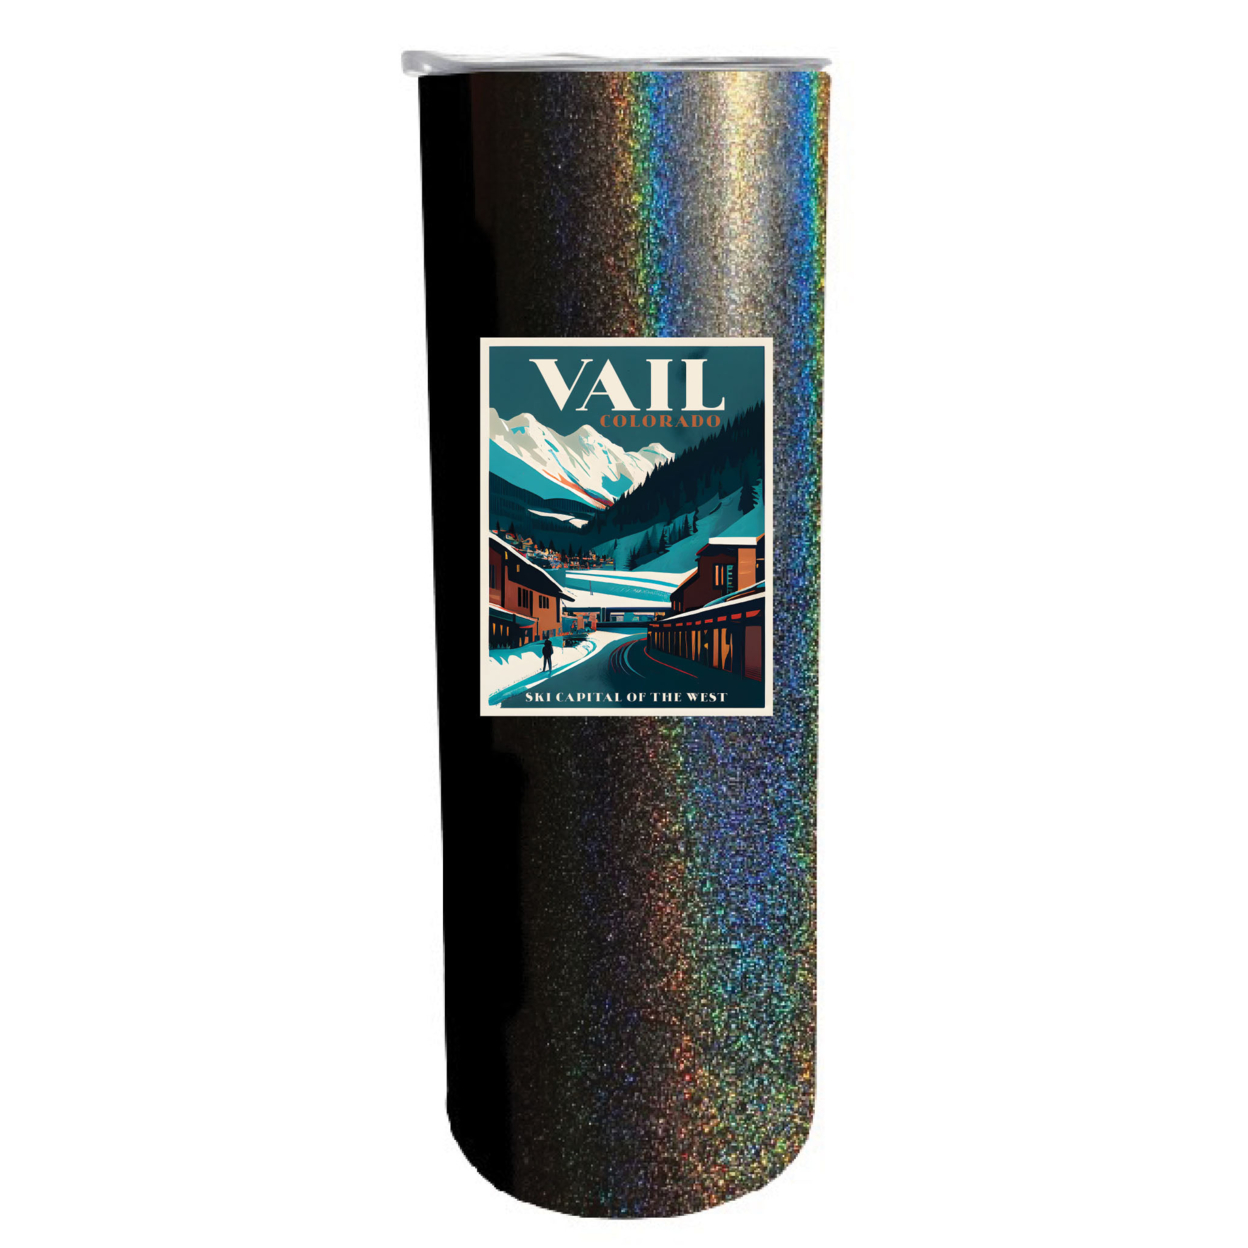 Vail Colorado Souvenir 20 Oz Insulated Stainless Steel Skinny Tumbler - Rainbow Glitter Pink